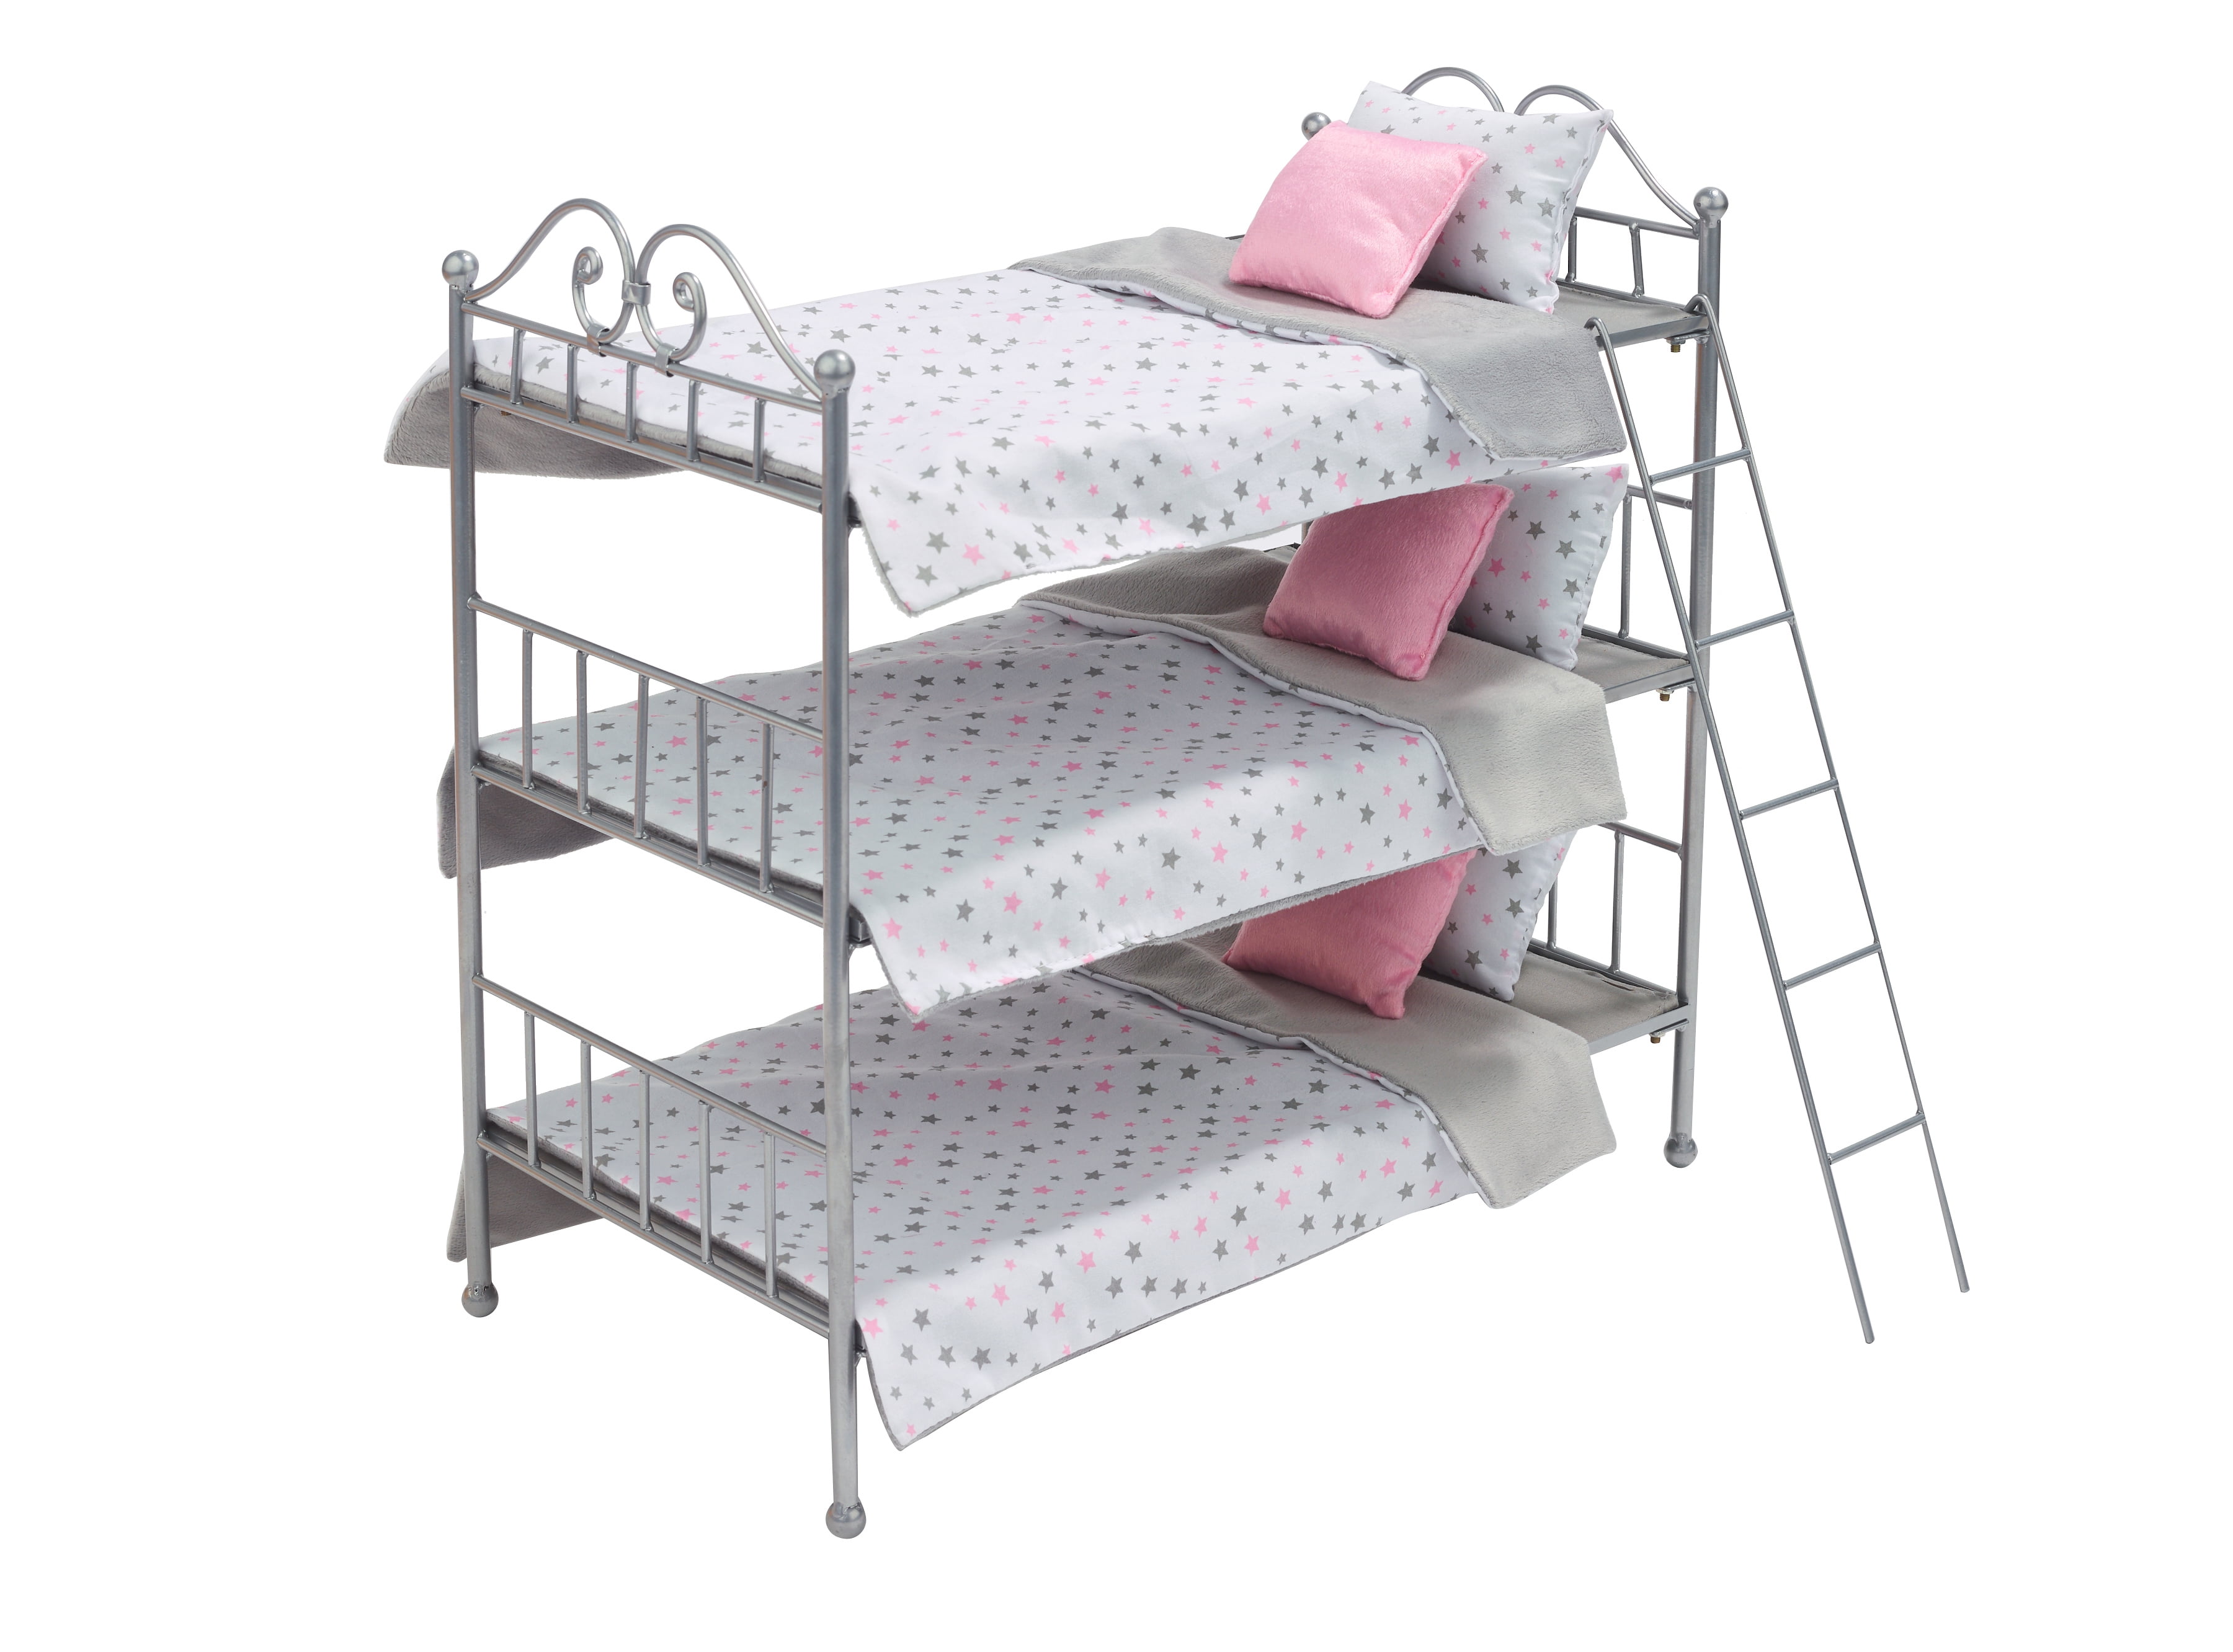 Badger Basket Scrollwork Metal Triple, Pictures Of American Girl Doll Bunk Beds